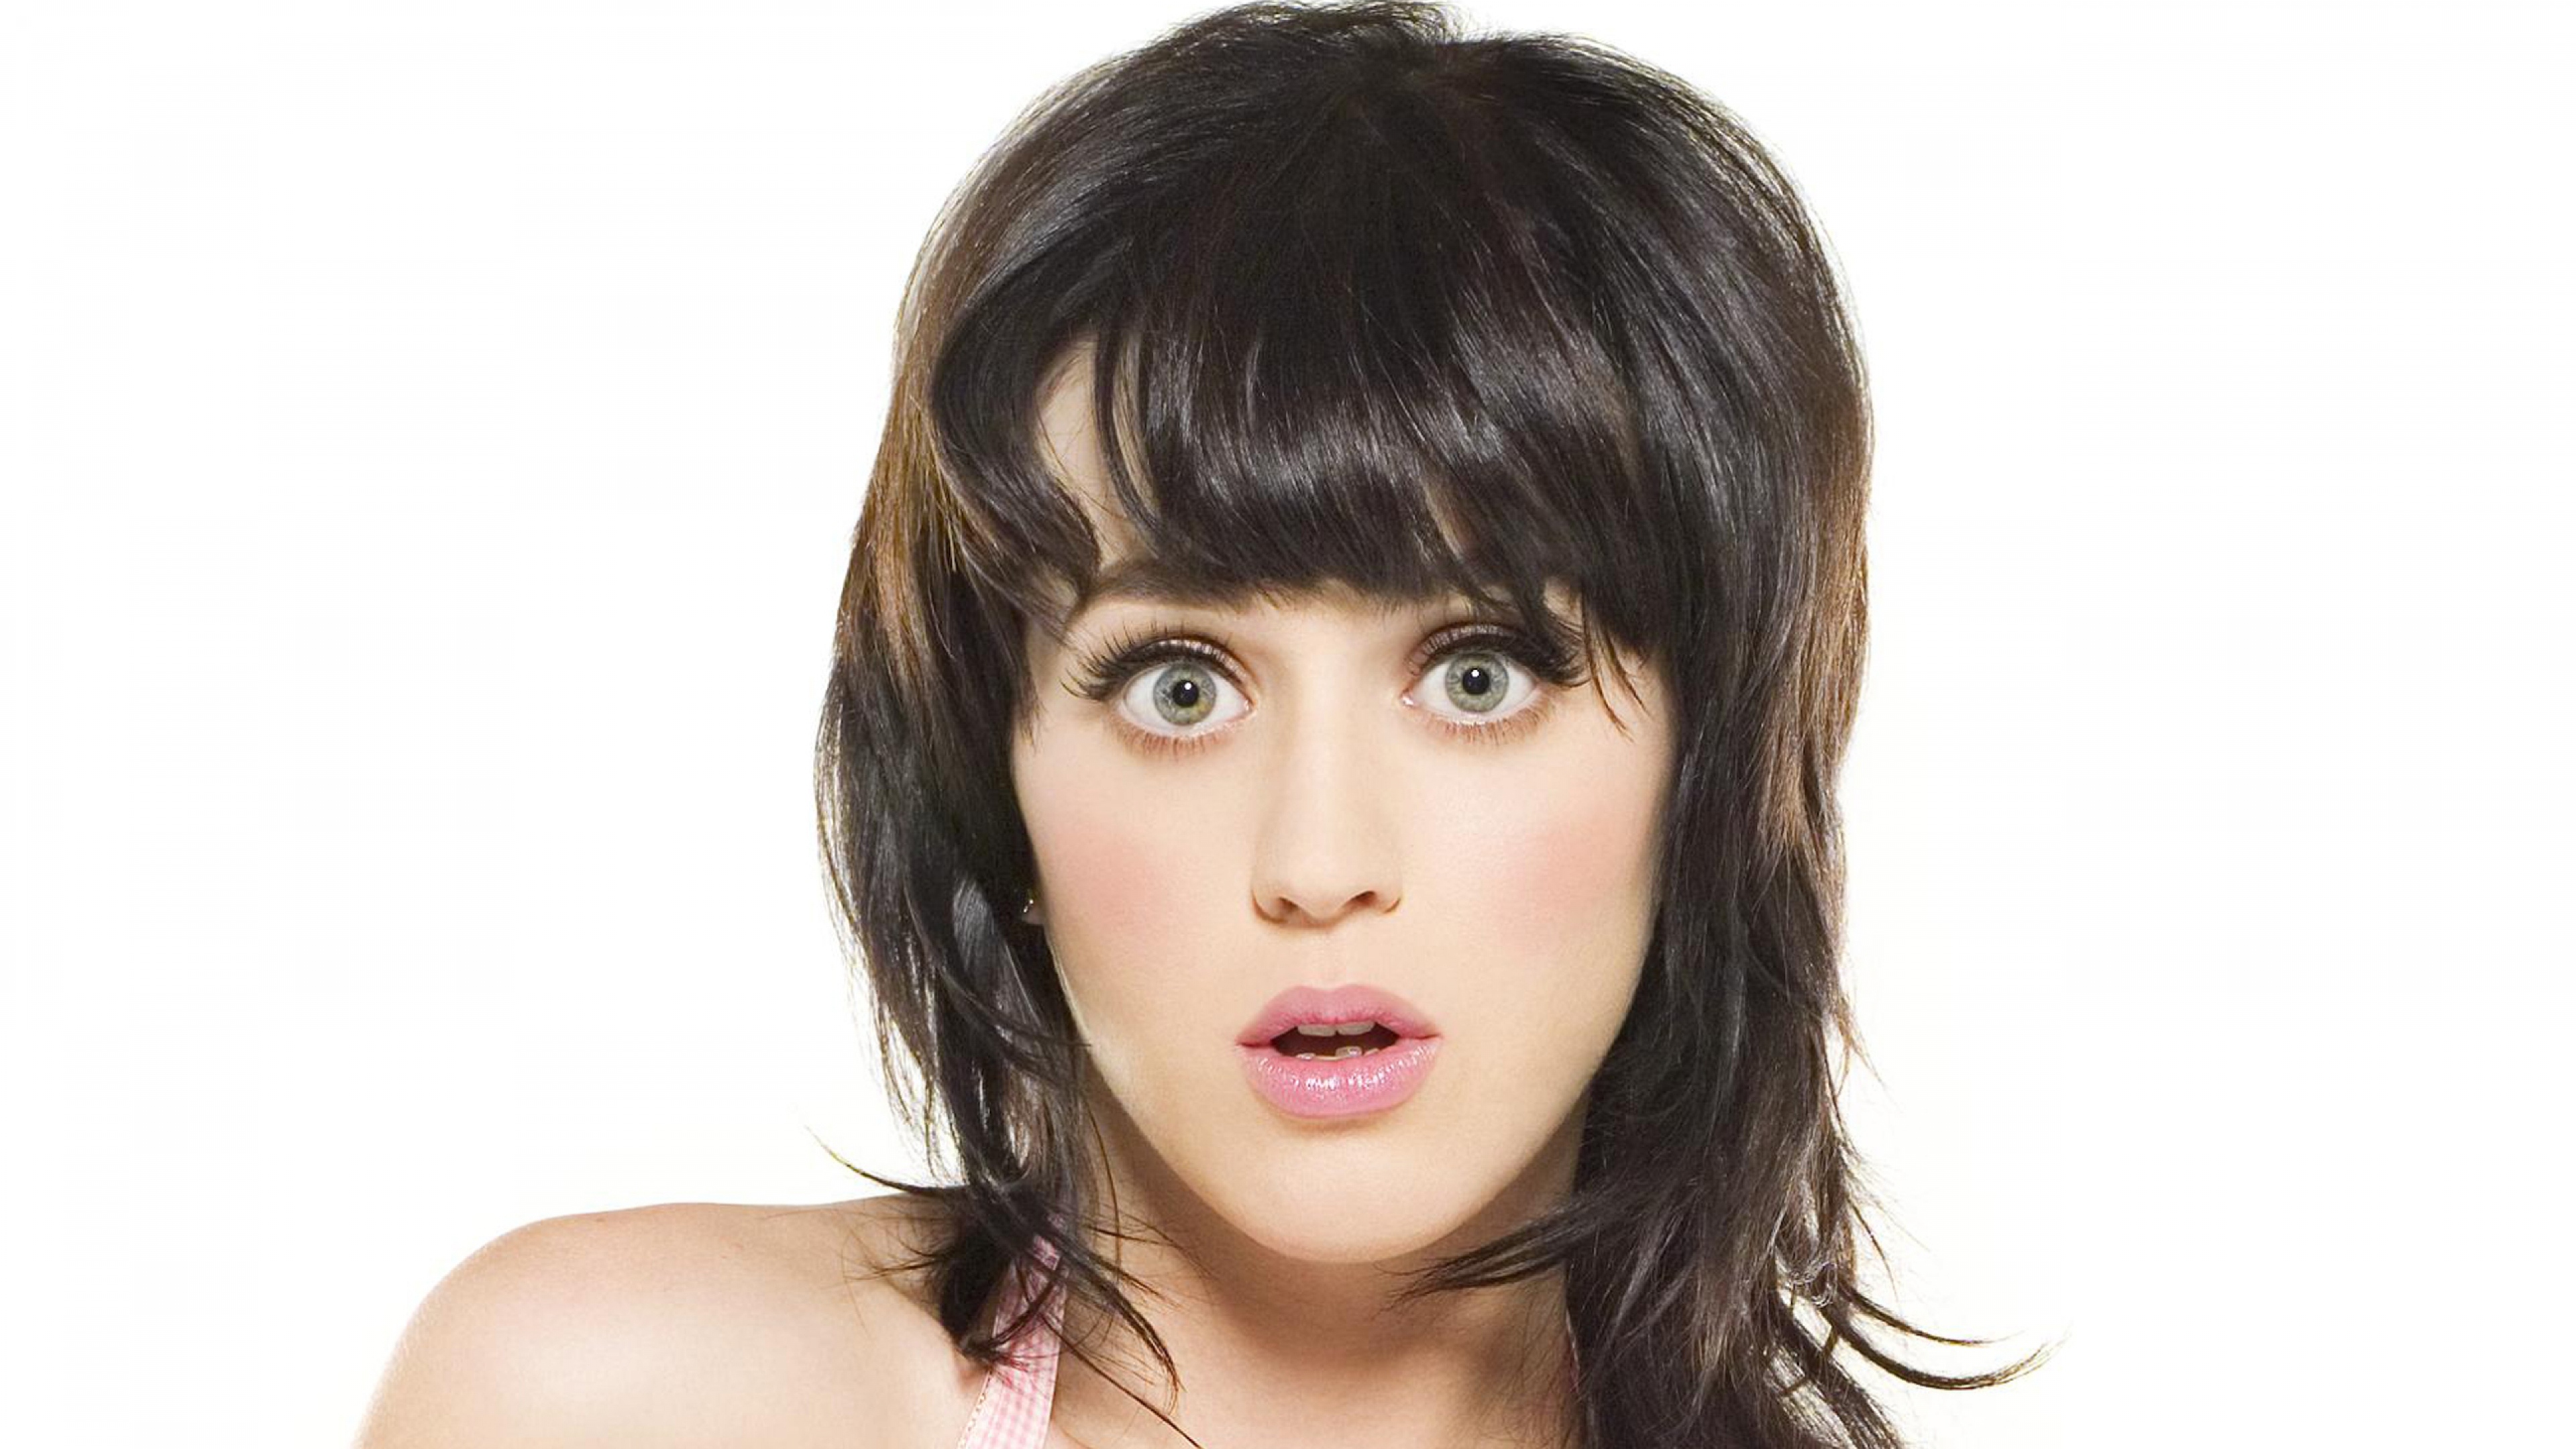 Katy Perry Face Girl Celebrity Wallpaper Background 4k Ultra HD